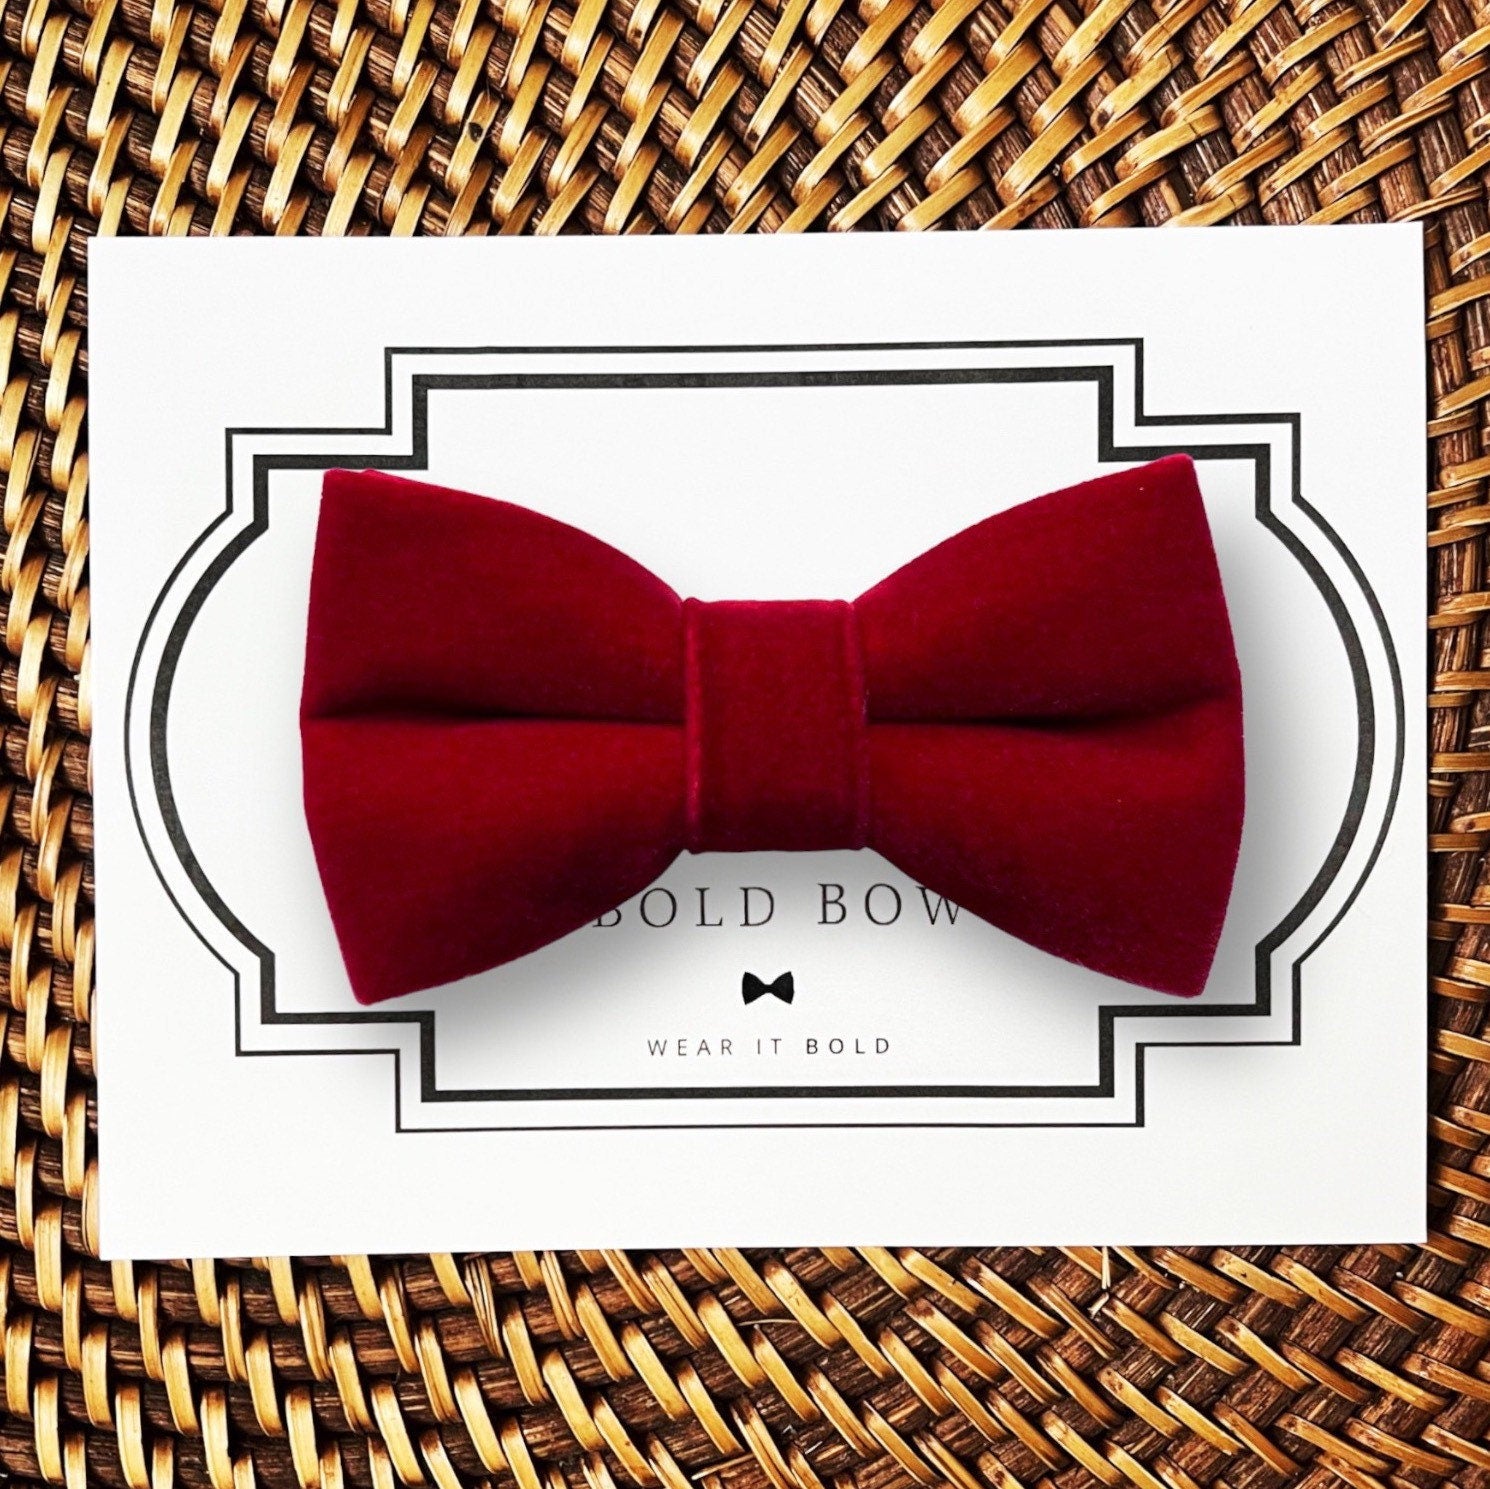 Red Velvet Bow for Dog Collar and Cat Collar